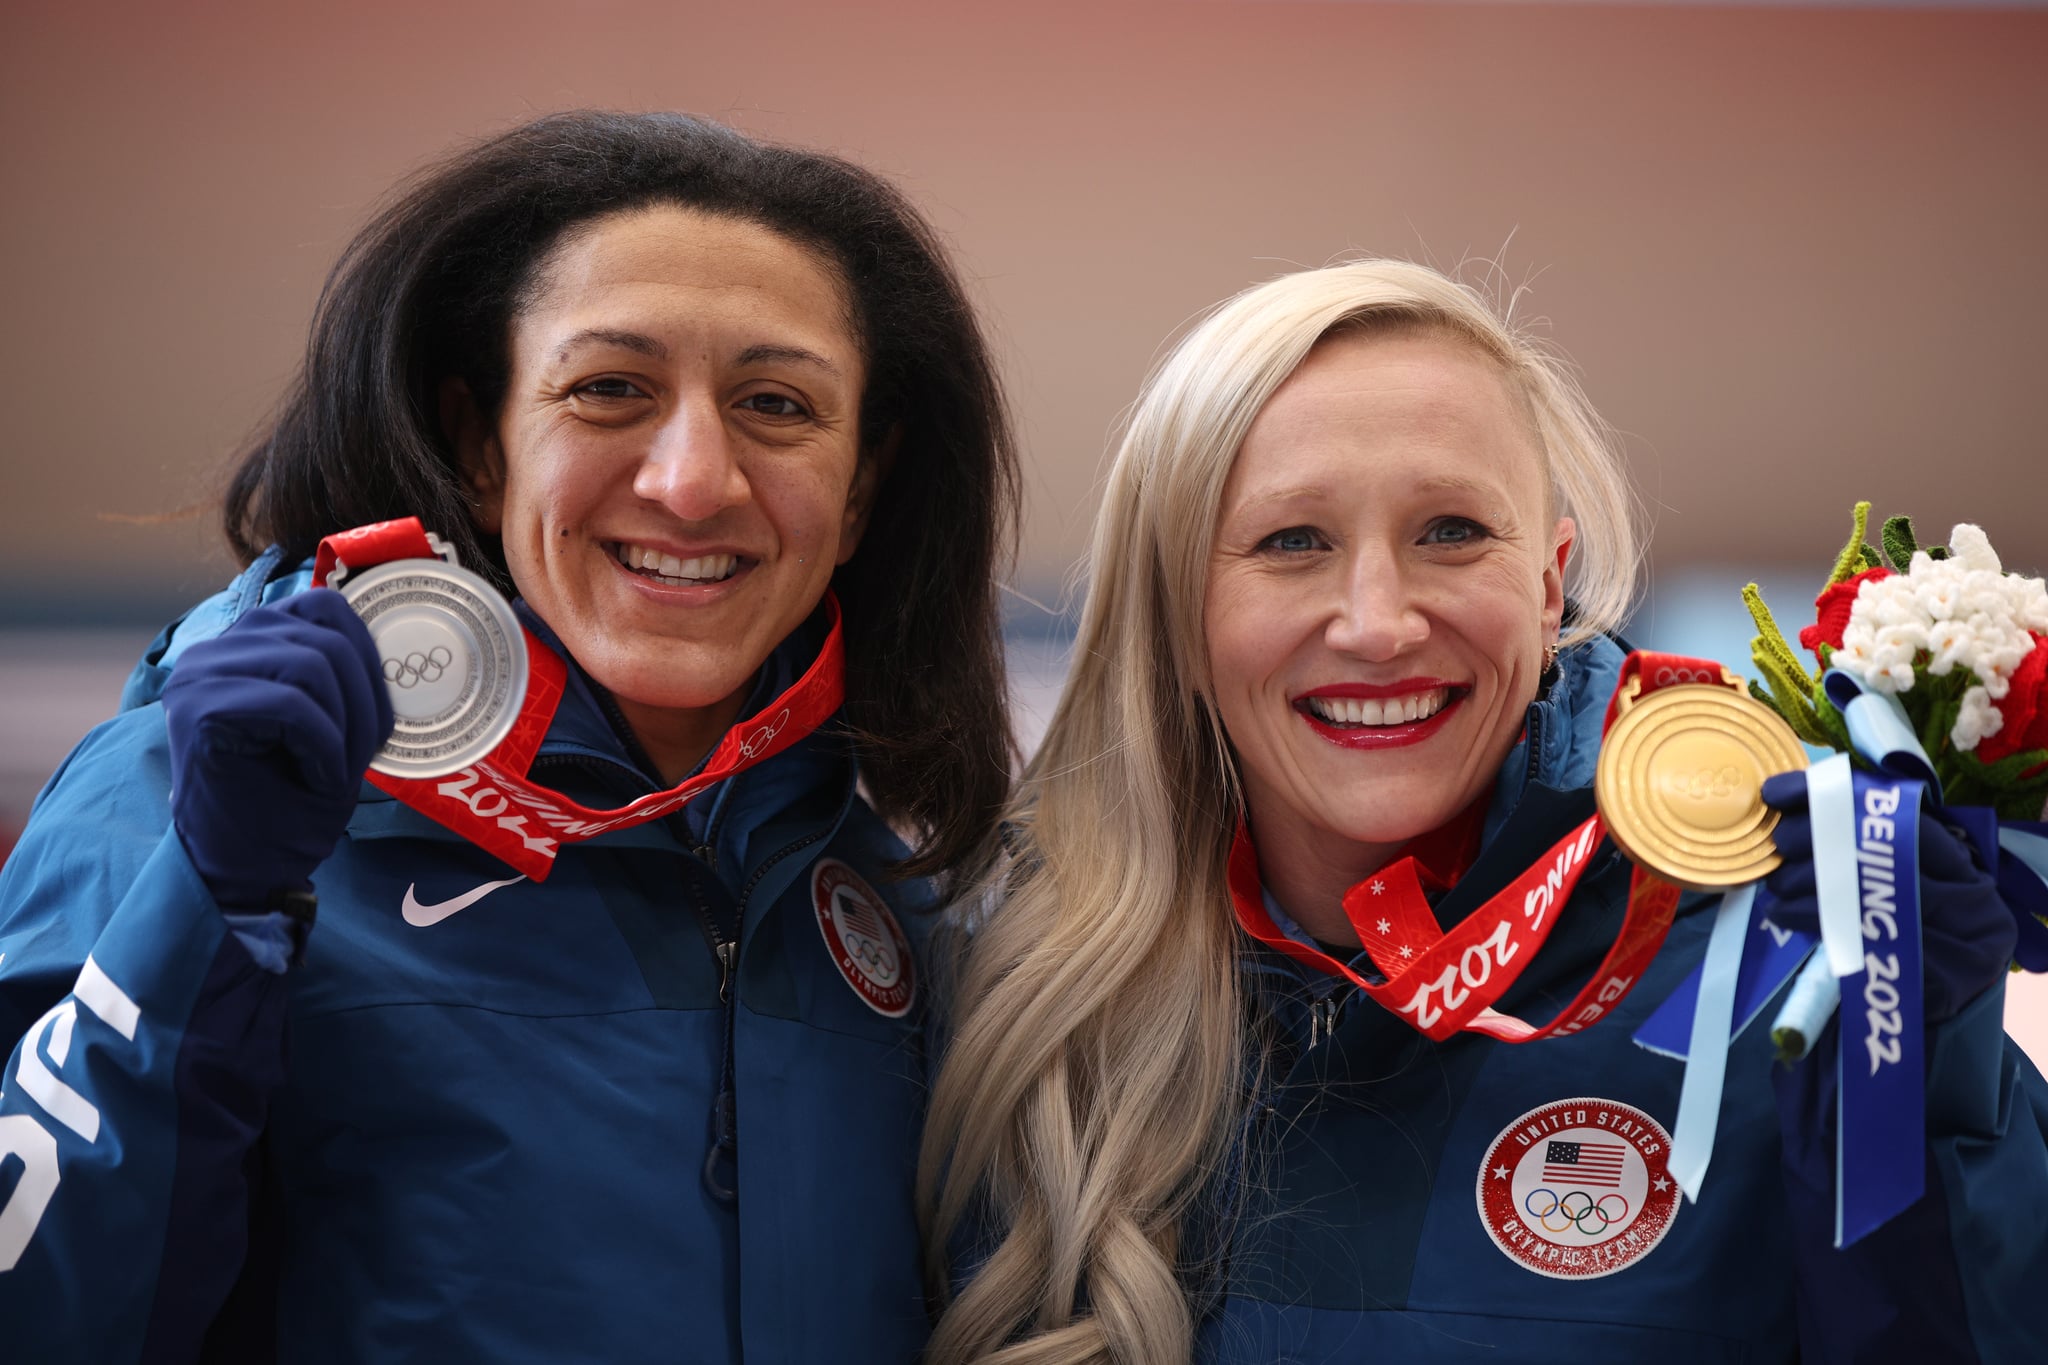 YANQING, CHINA - FEBRUARY 14:  (L-R) Silver medallist Elana Meyers Taylor of Team United States and Gold medallist Kaillie Humphries of Team United States celebrate during the Women's Monobob medal ceremony on day 10 of Beijing 2022 Winter Olympic Games at National Sliding Centre on February 14, 2022 in Yanqing, China. (Photo by Adam Pretty/Getty Images)